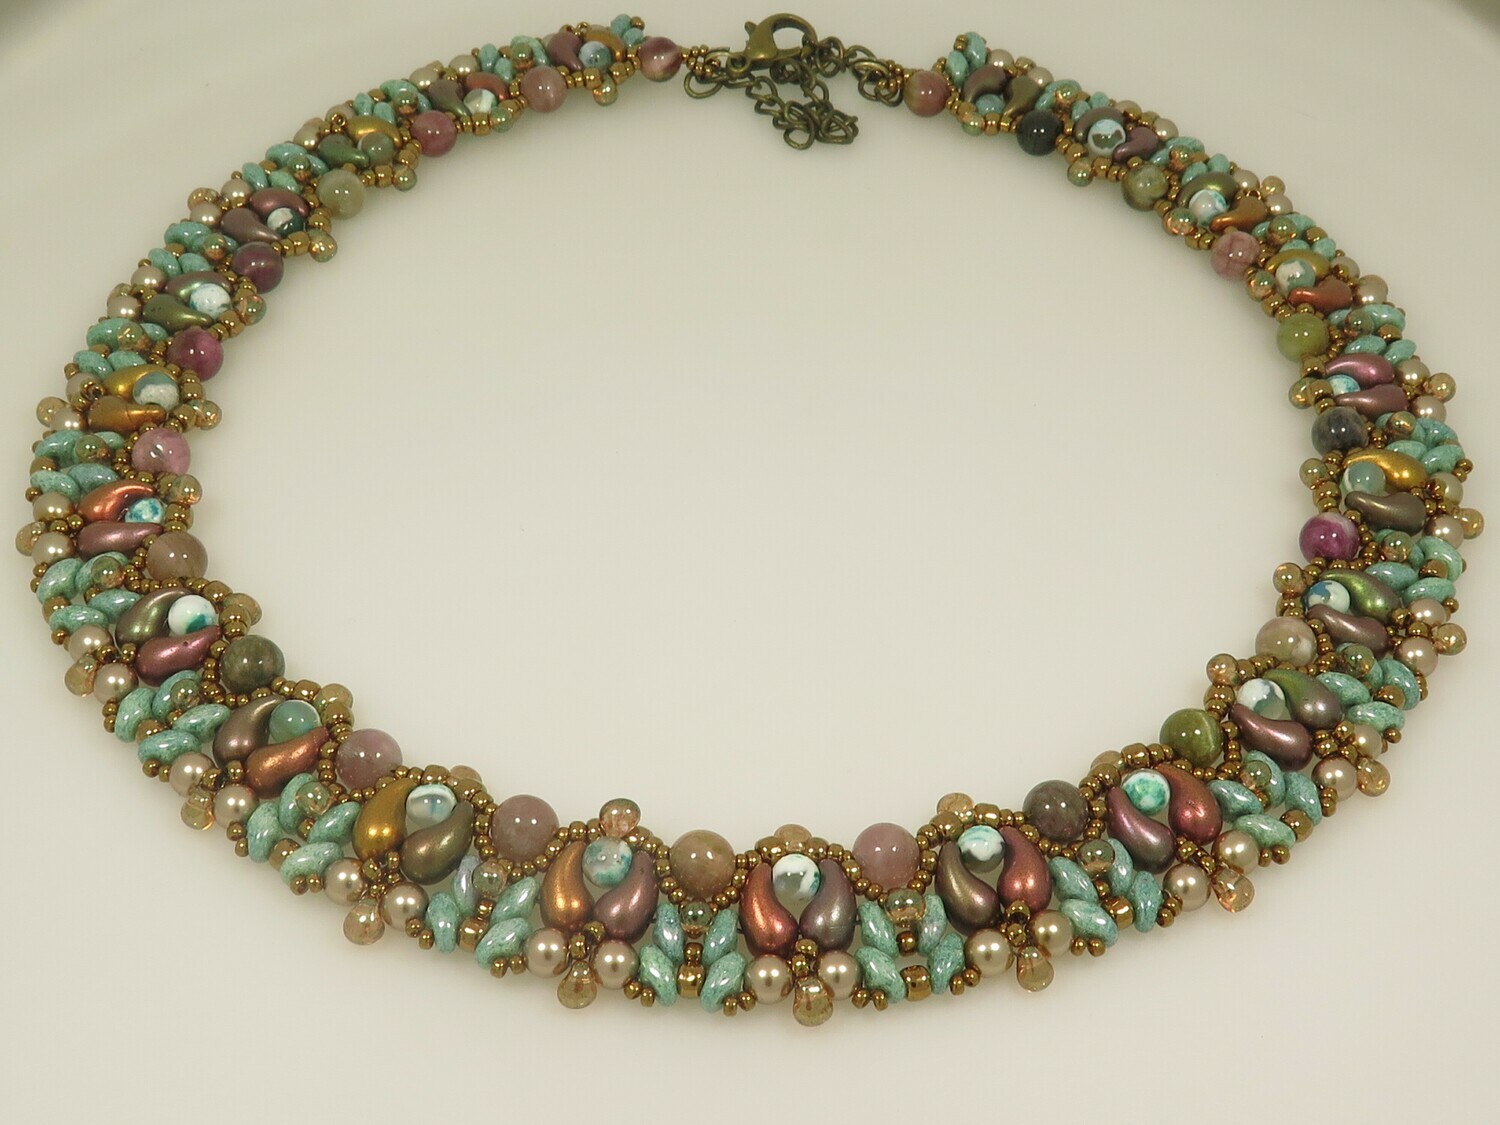 Marbles Necklace - Beading Tutorial - PDF